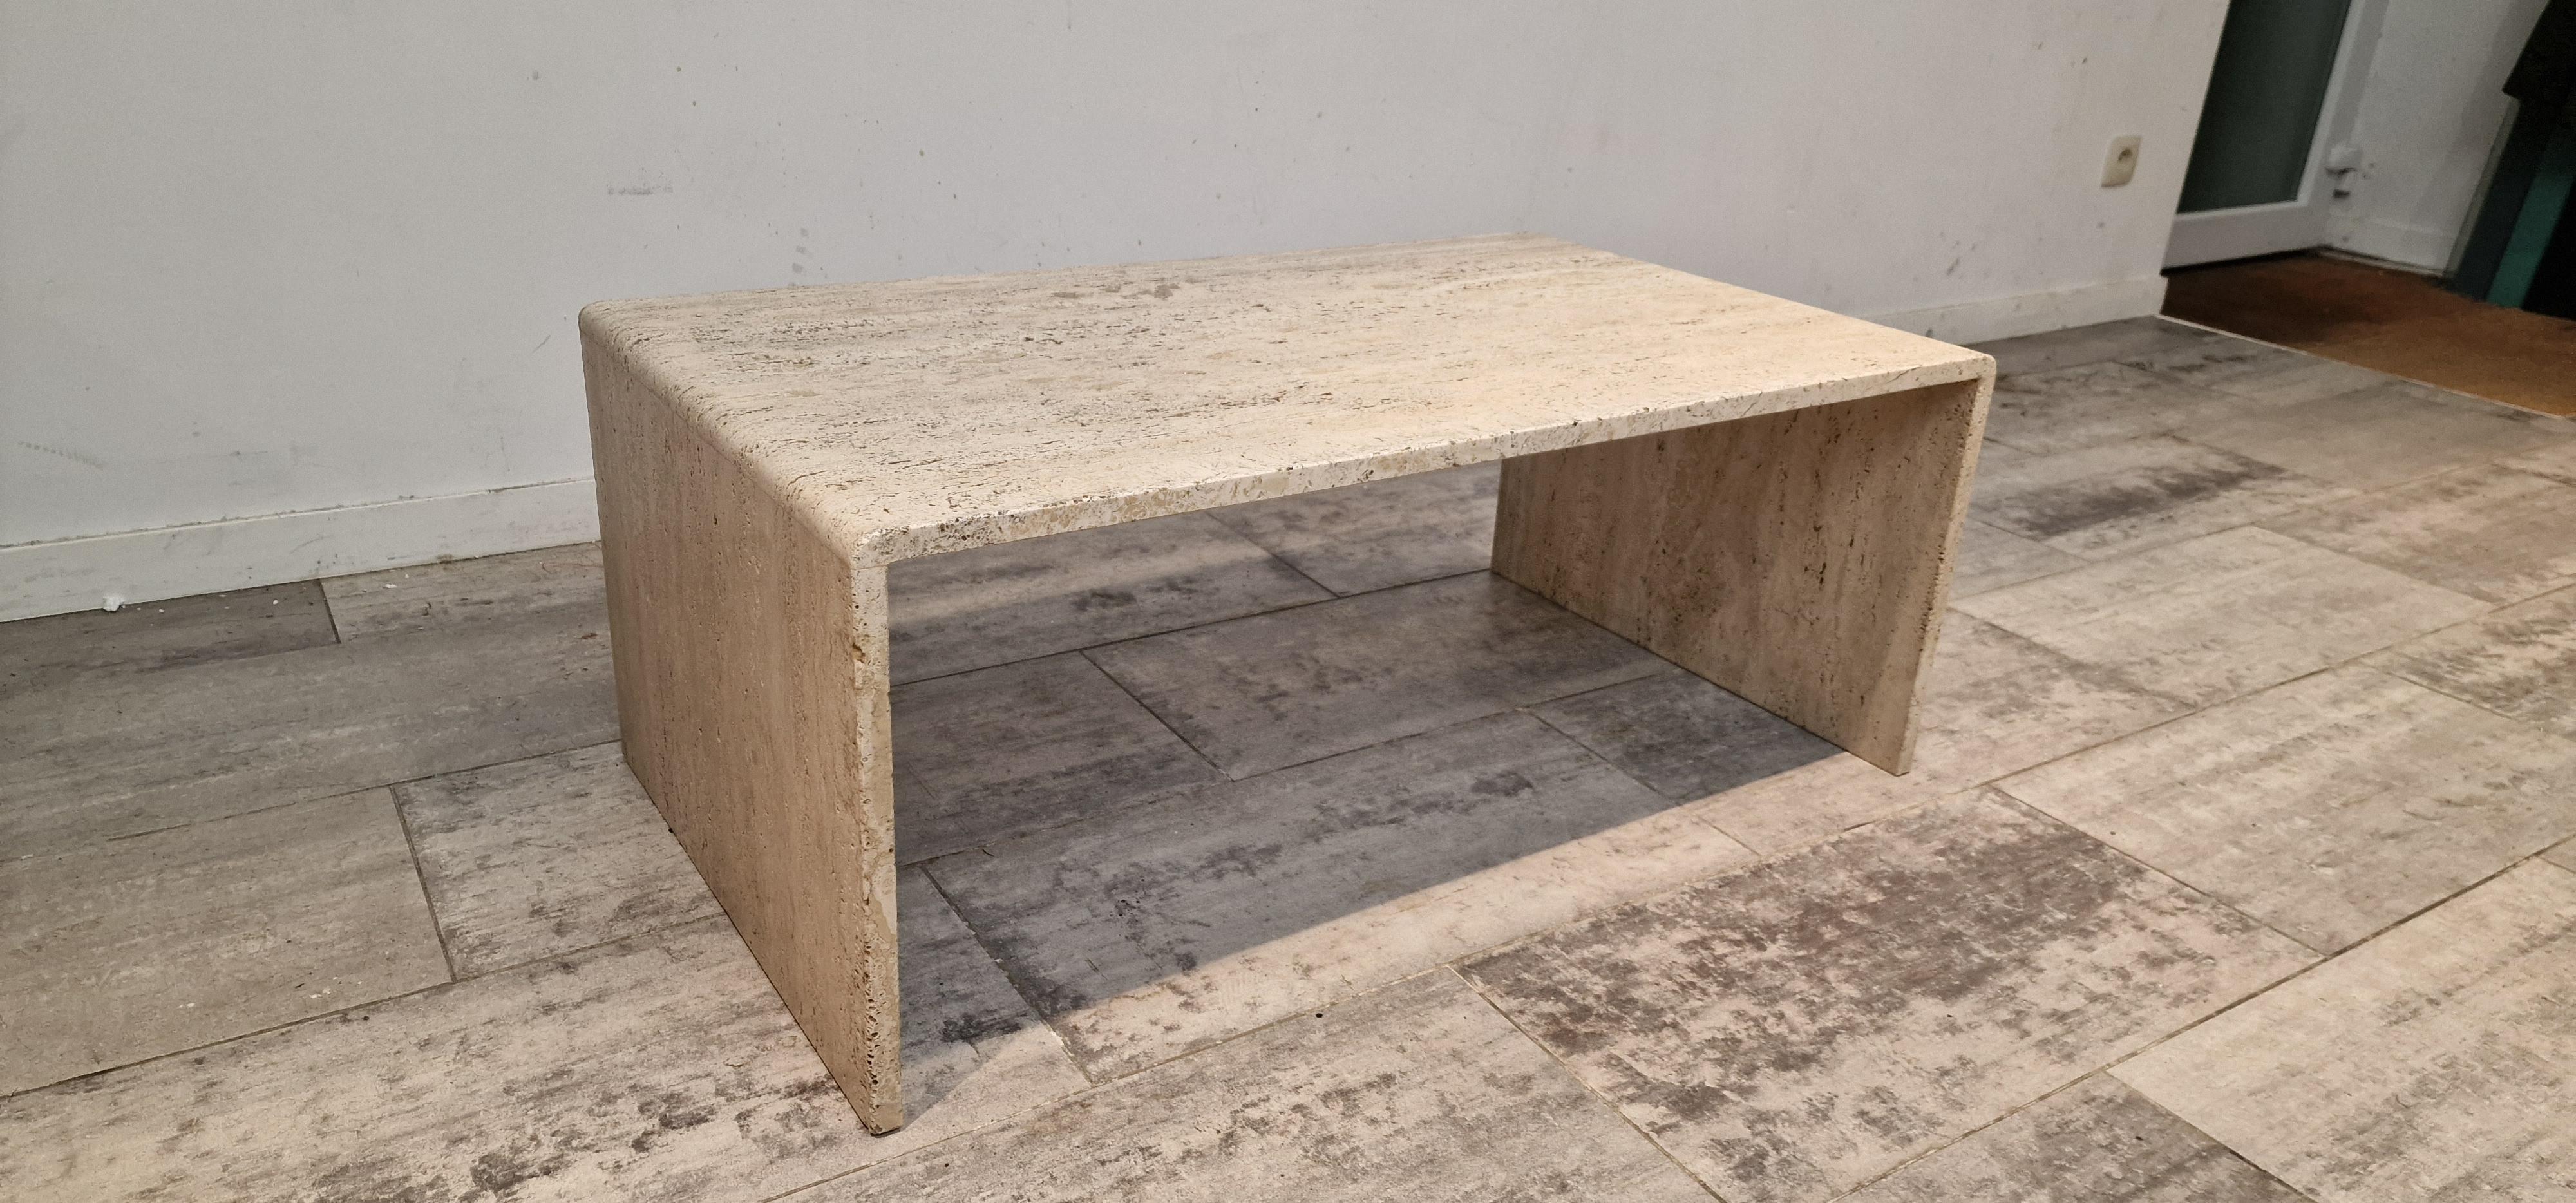 Rough Travertine coffee table by Up & Up, Italy.